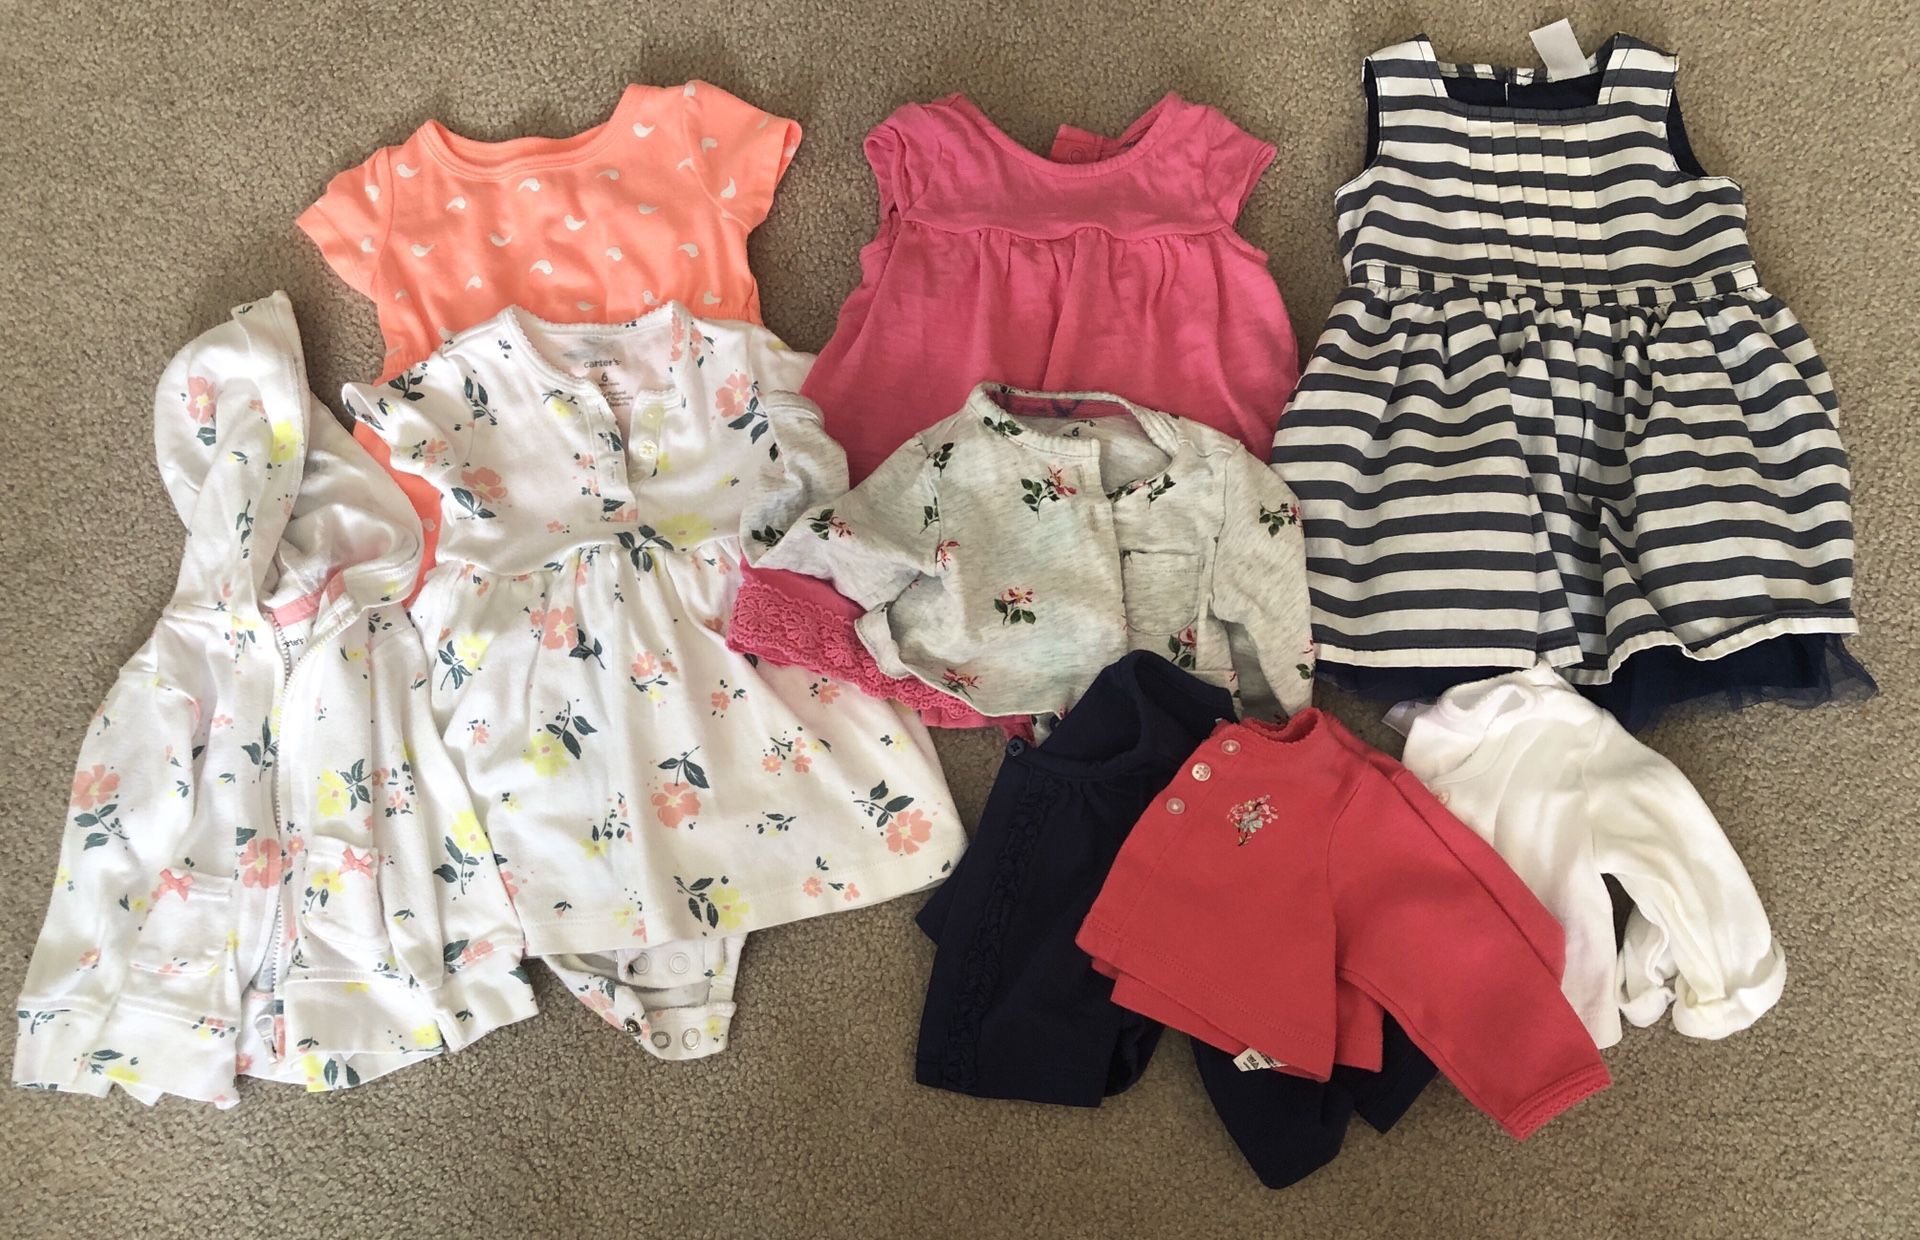 Baby girl clothes - 6 months